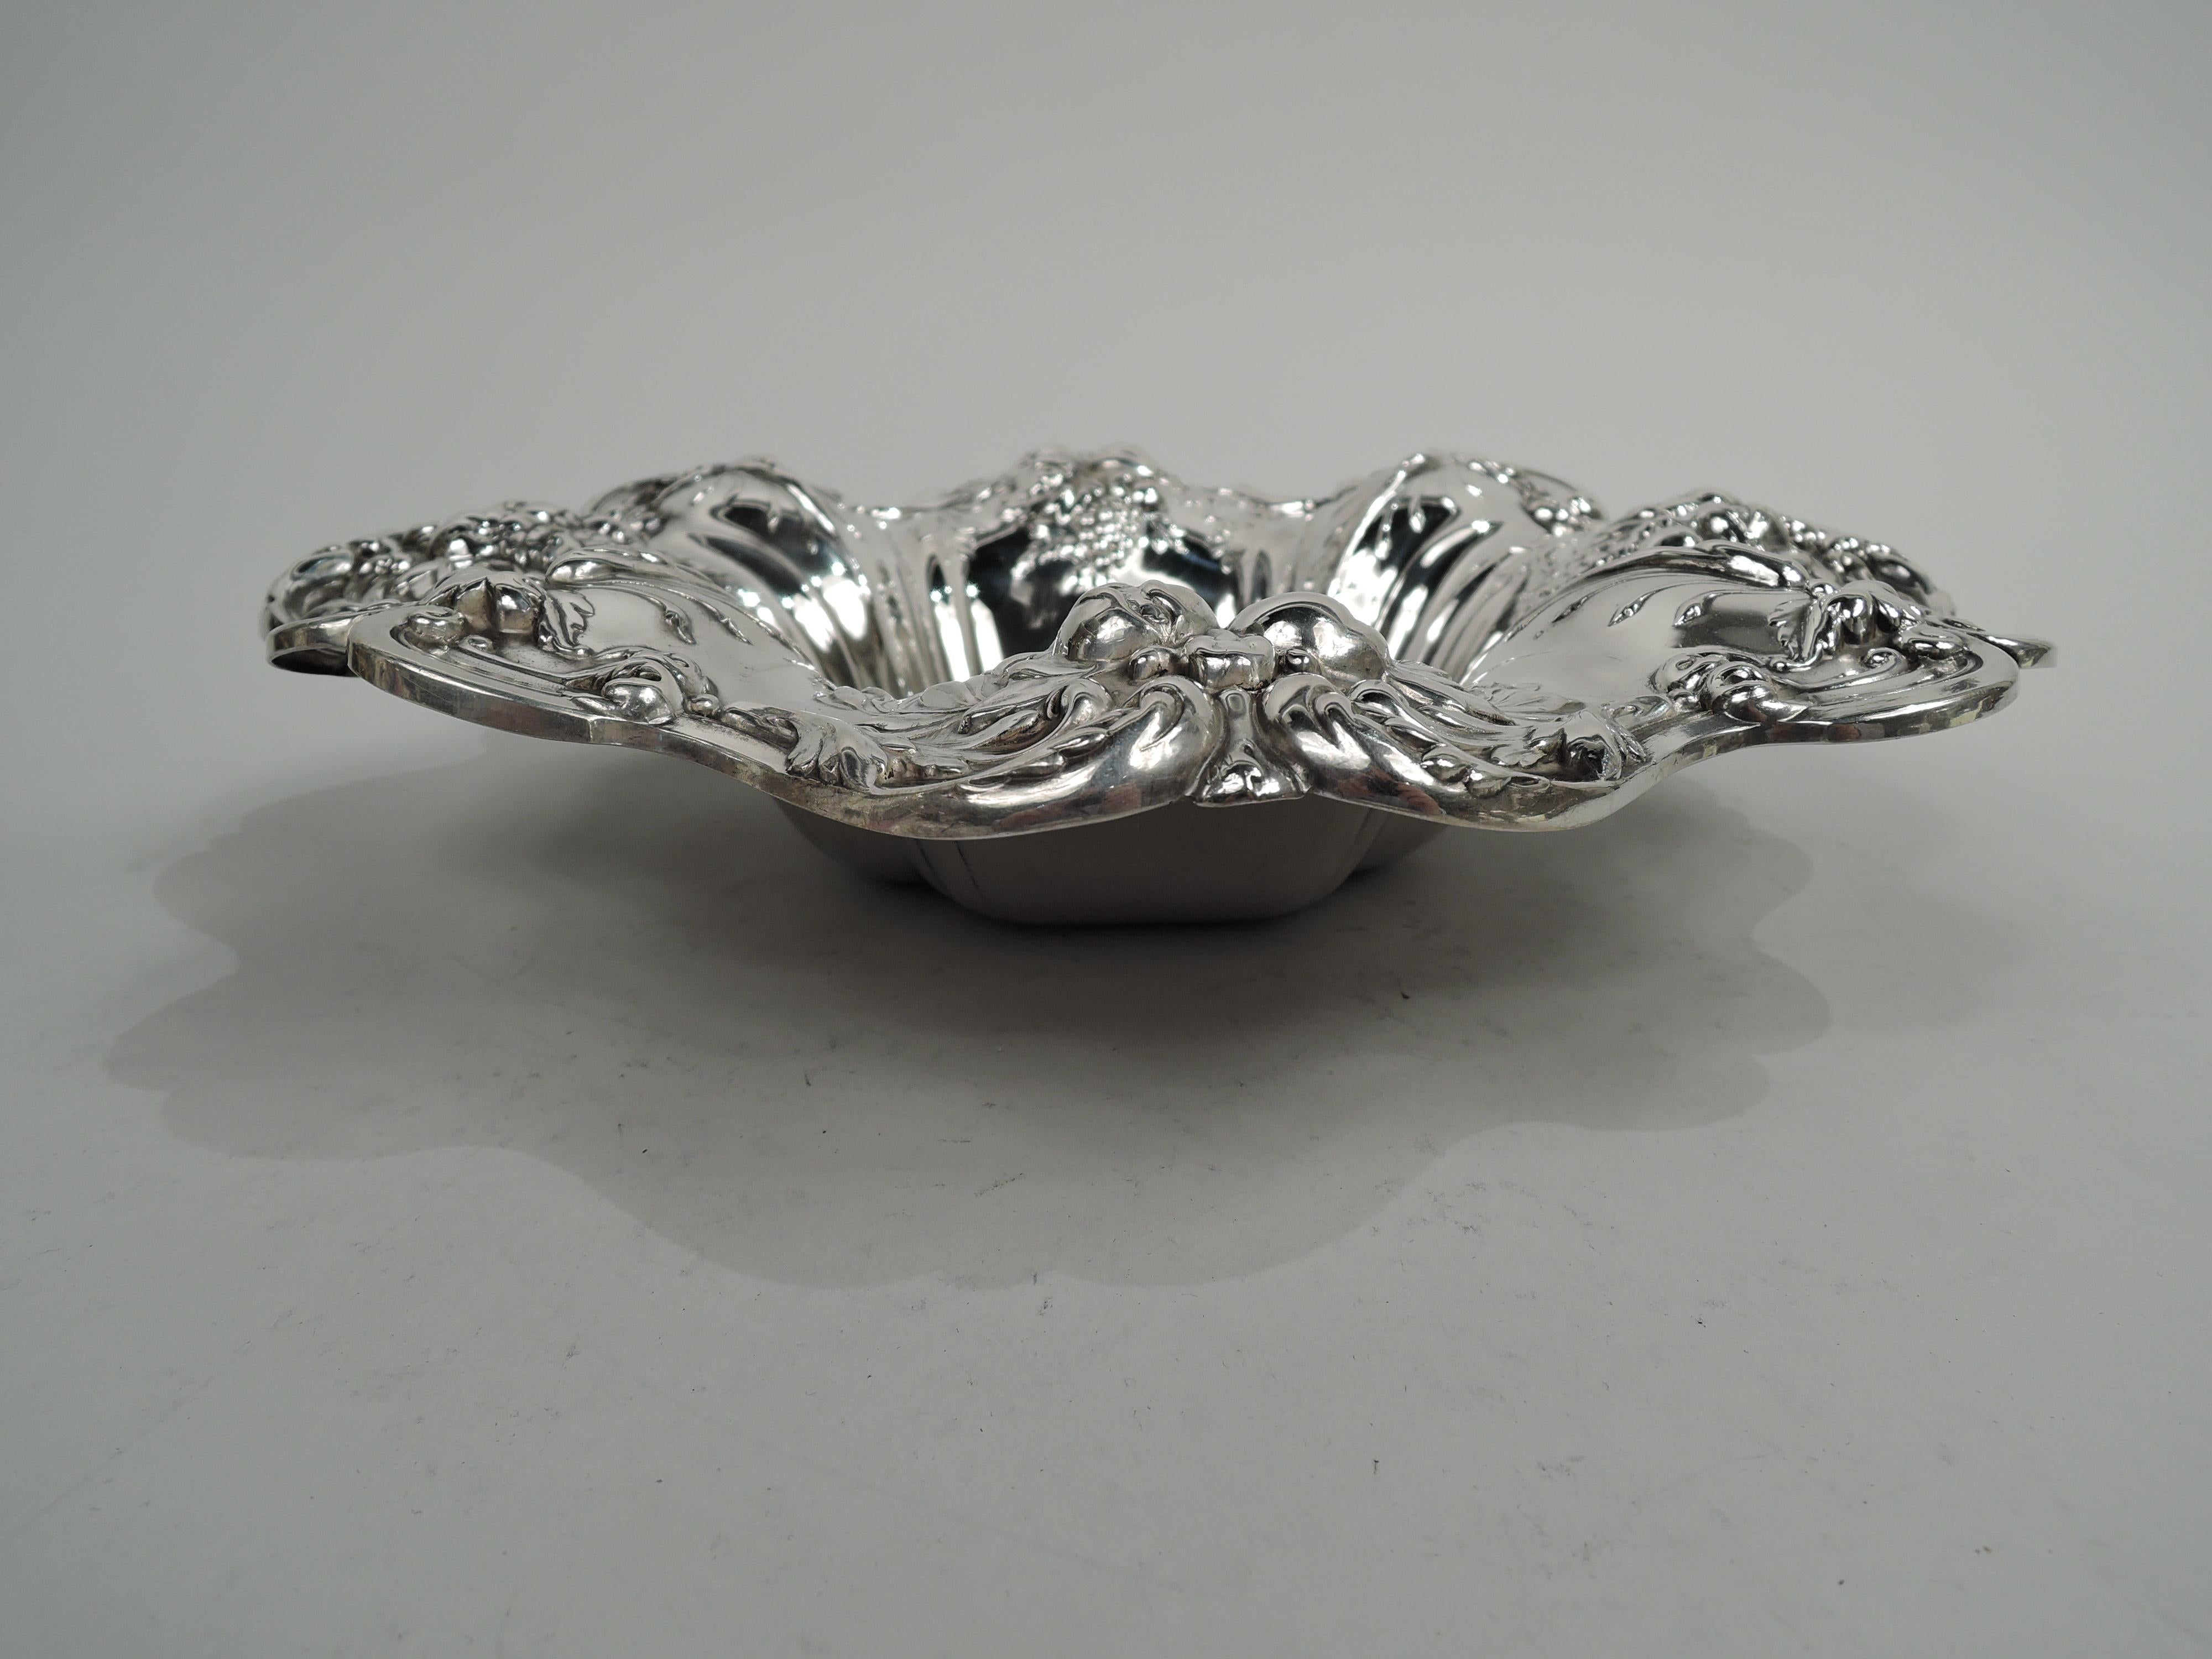 Francis I sterling silver bowl. Made by Reed & Barton in Taunton, Mass. in 1950. Quatrefoil well and wide flared mouth with wavy scrolled rim. Chased and embossed fruits. A nice piece in the Classic French Renaissance pattern. Fully marked including